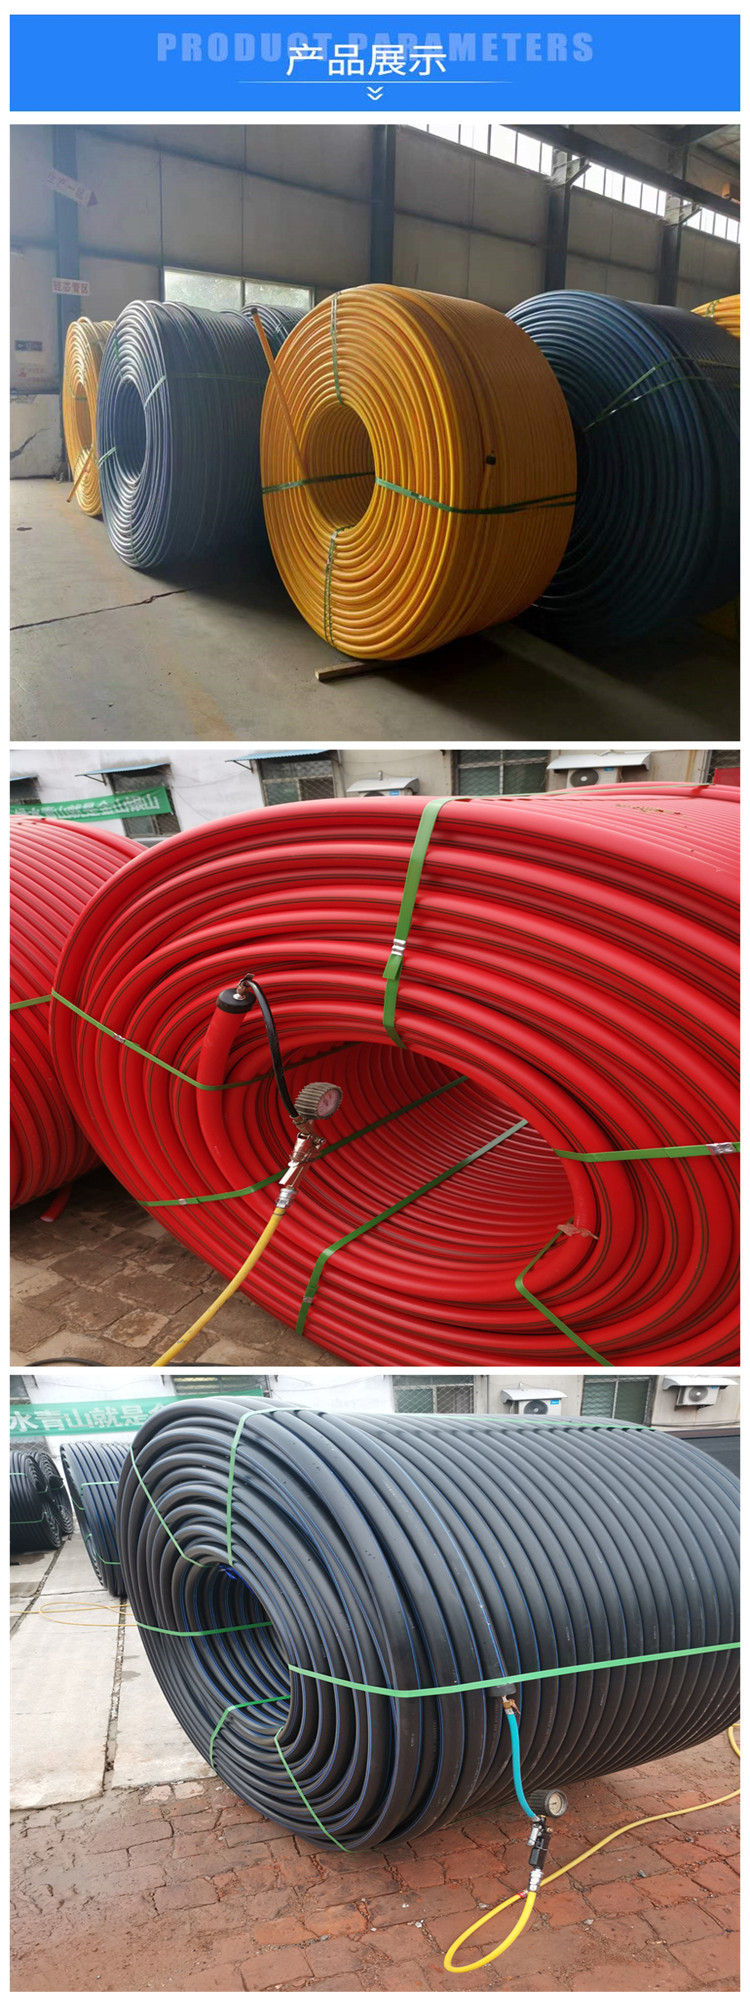 Airport high-speed PE silicon core pipe drag pipe communication external network hdpe grating threading pipe flame retardant inner wall smooth